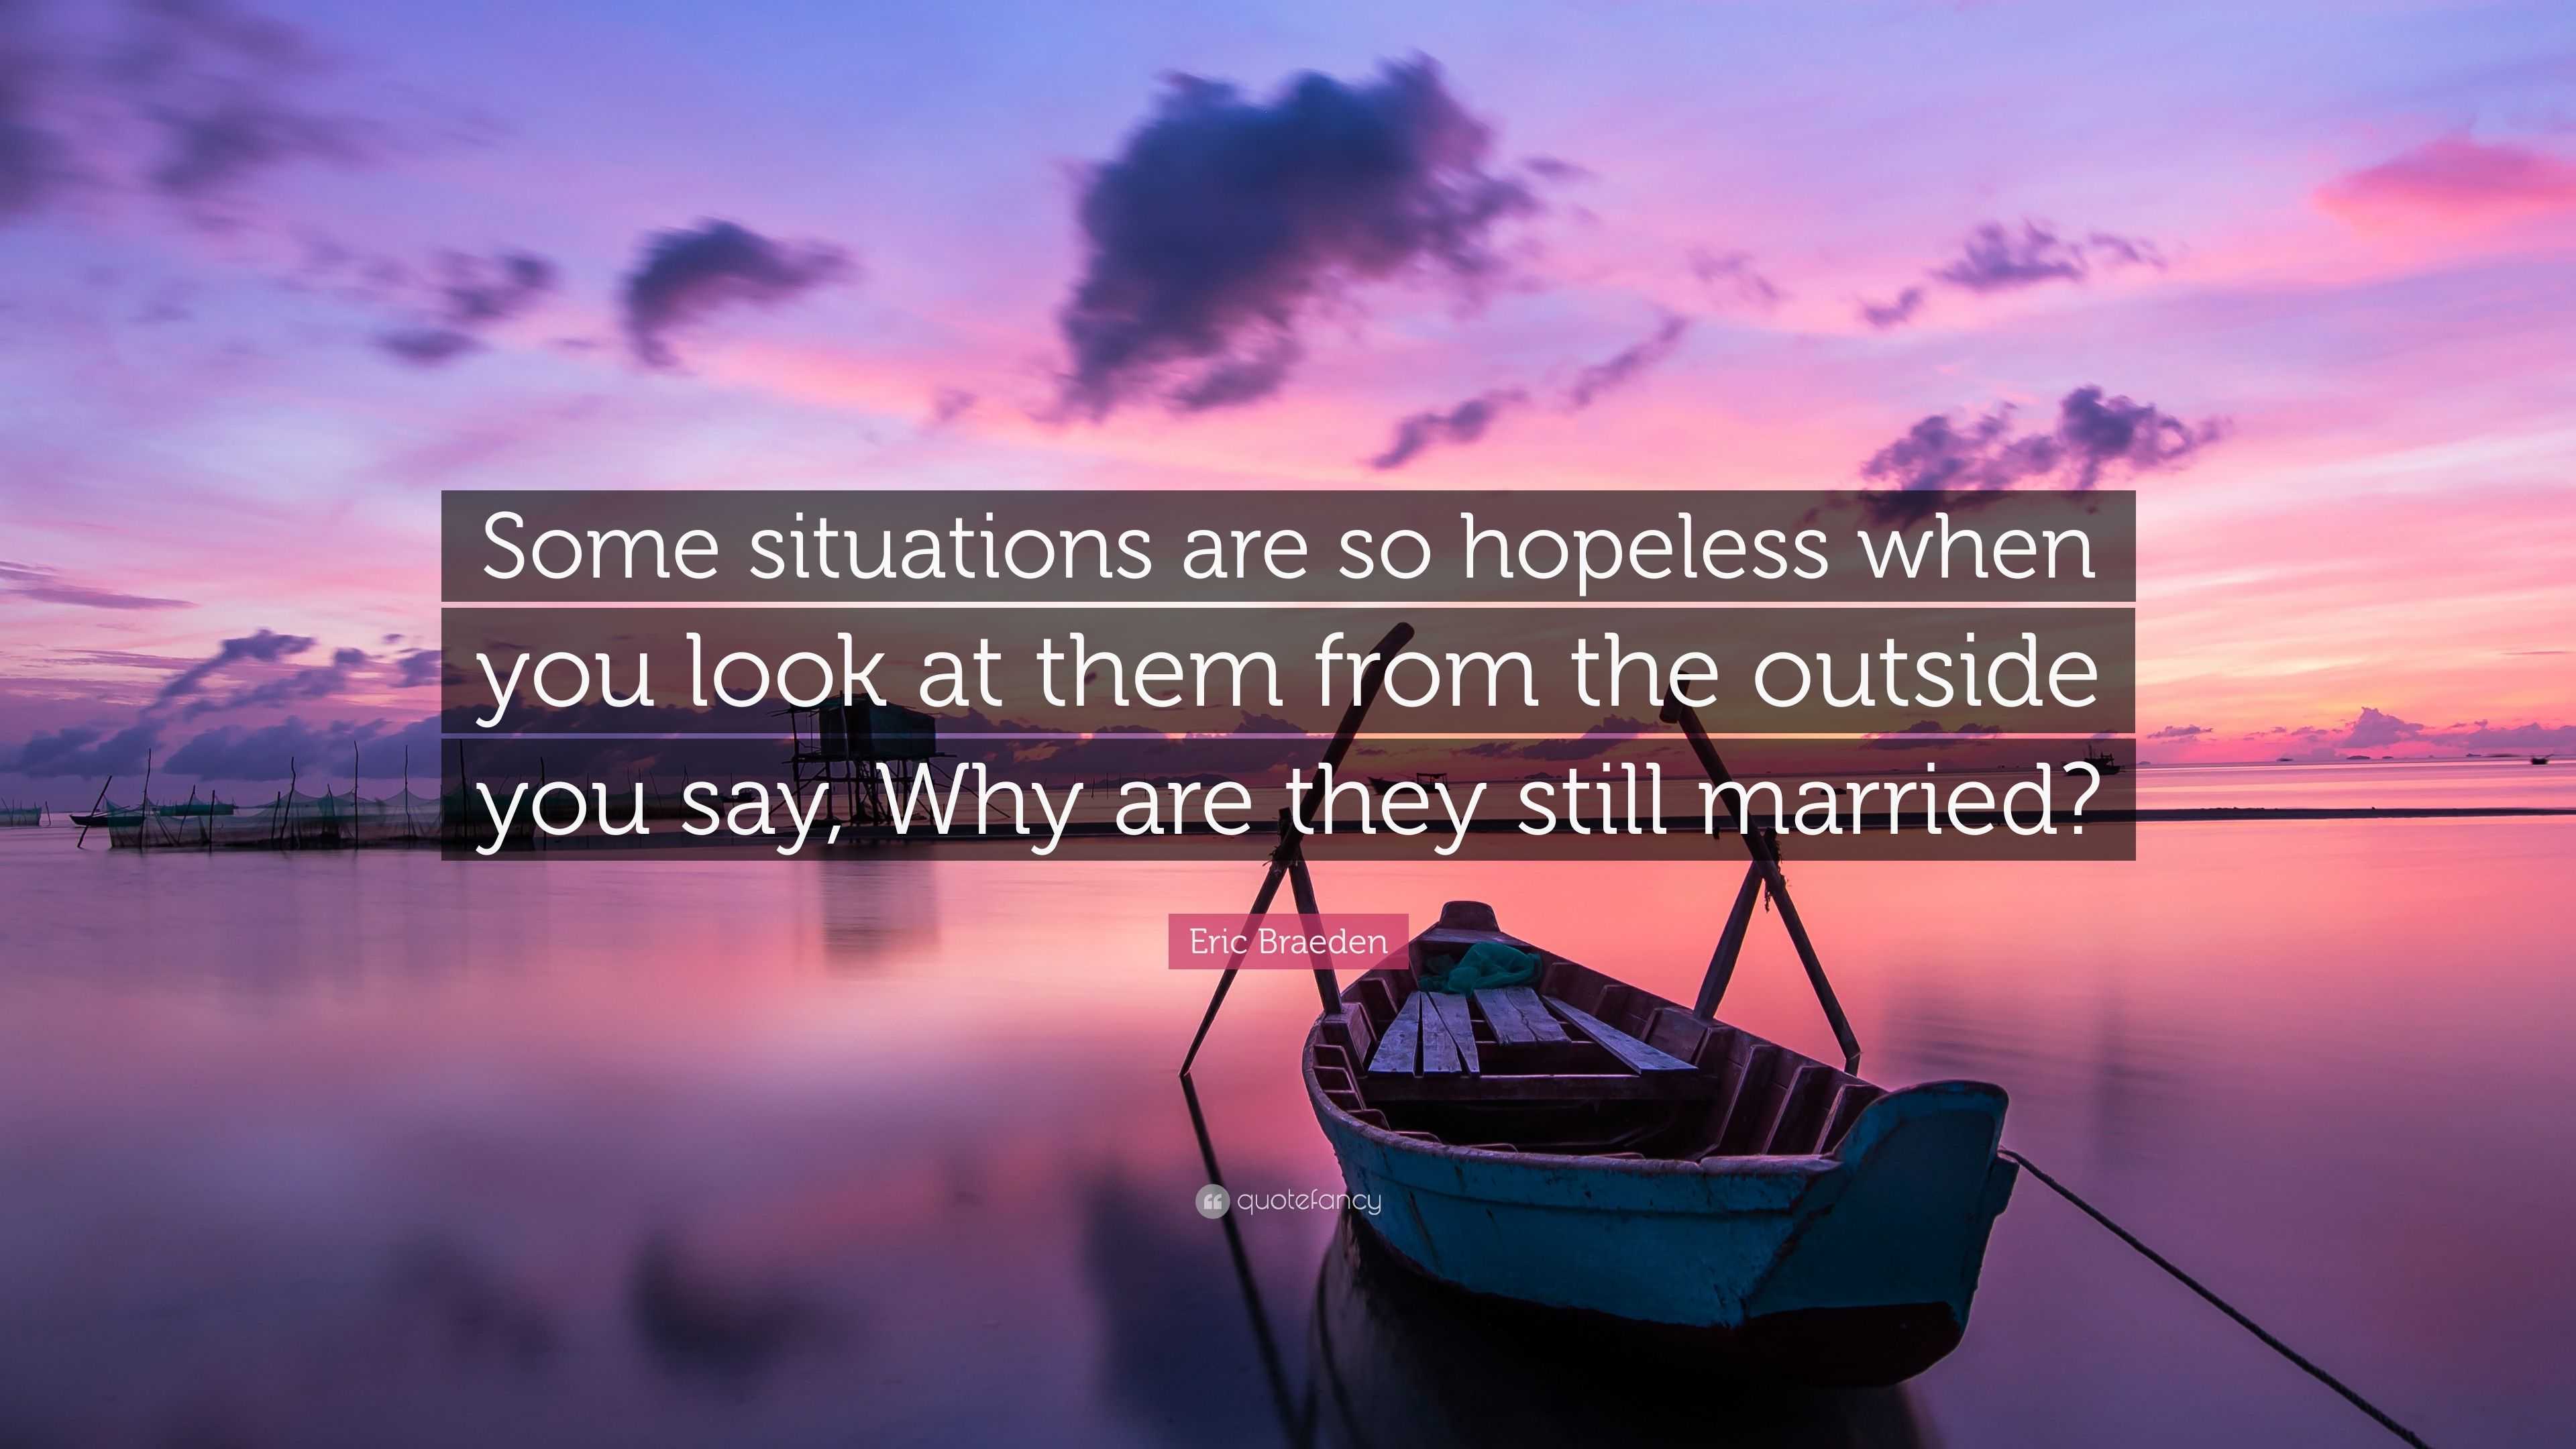 Eric Braeden Quote: “Some situations are so hopeless when you look at ...